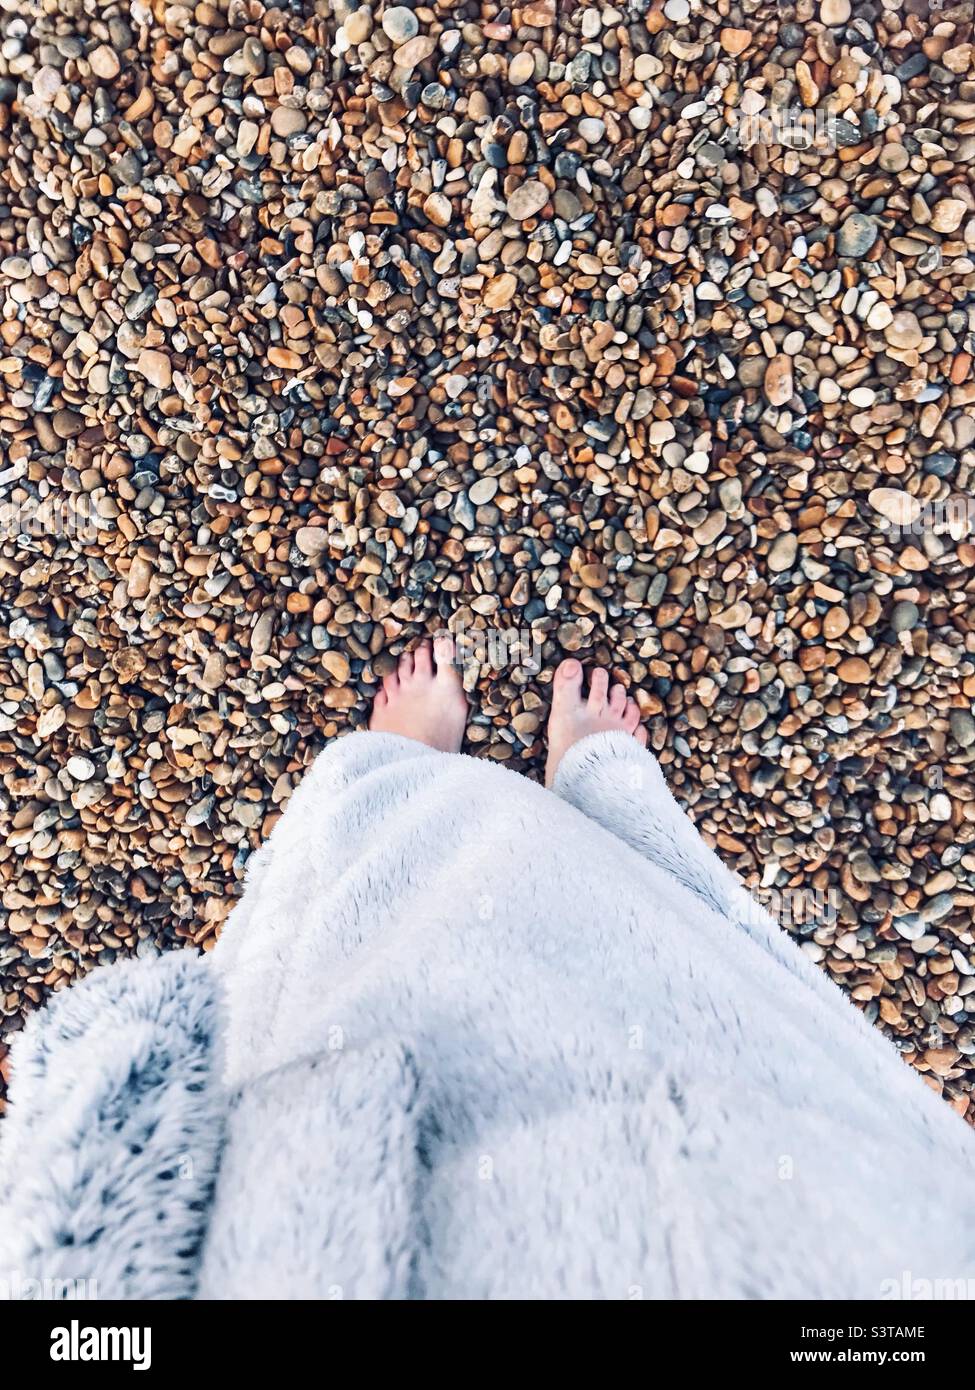 Wrapped up cosy in fluffy dressing gown after an early morning swim in the sea. Stock Photo